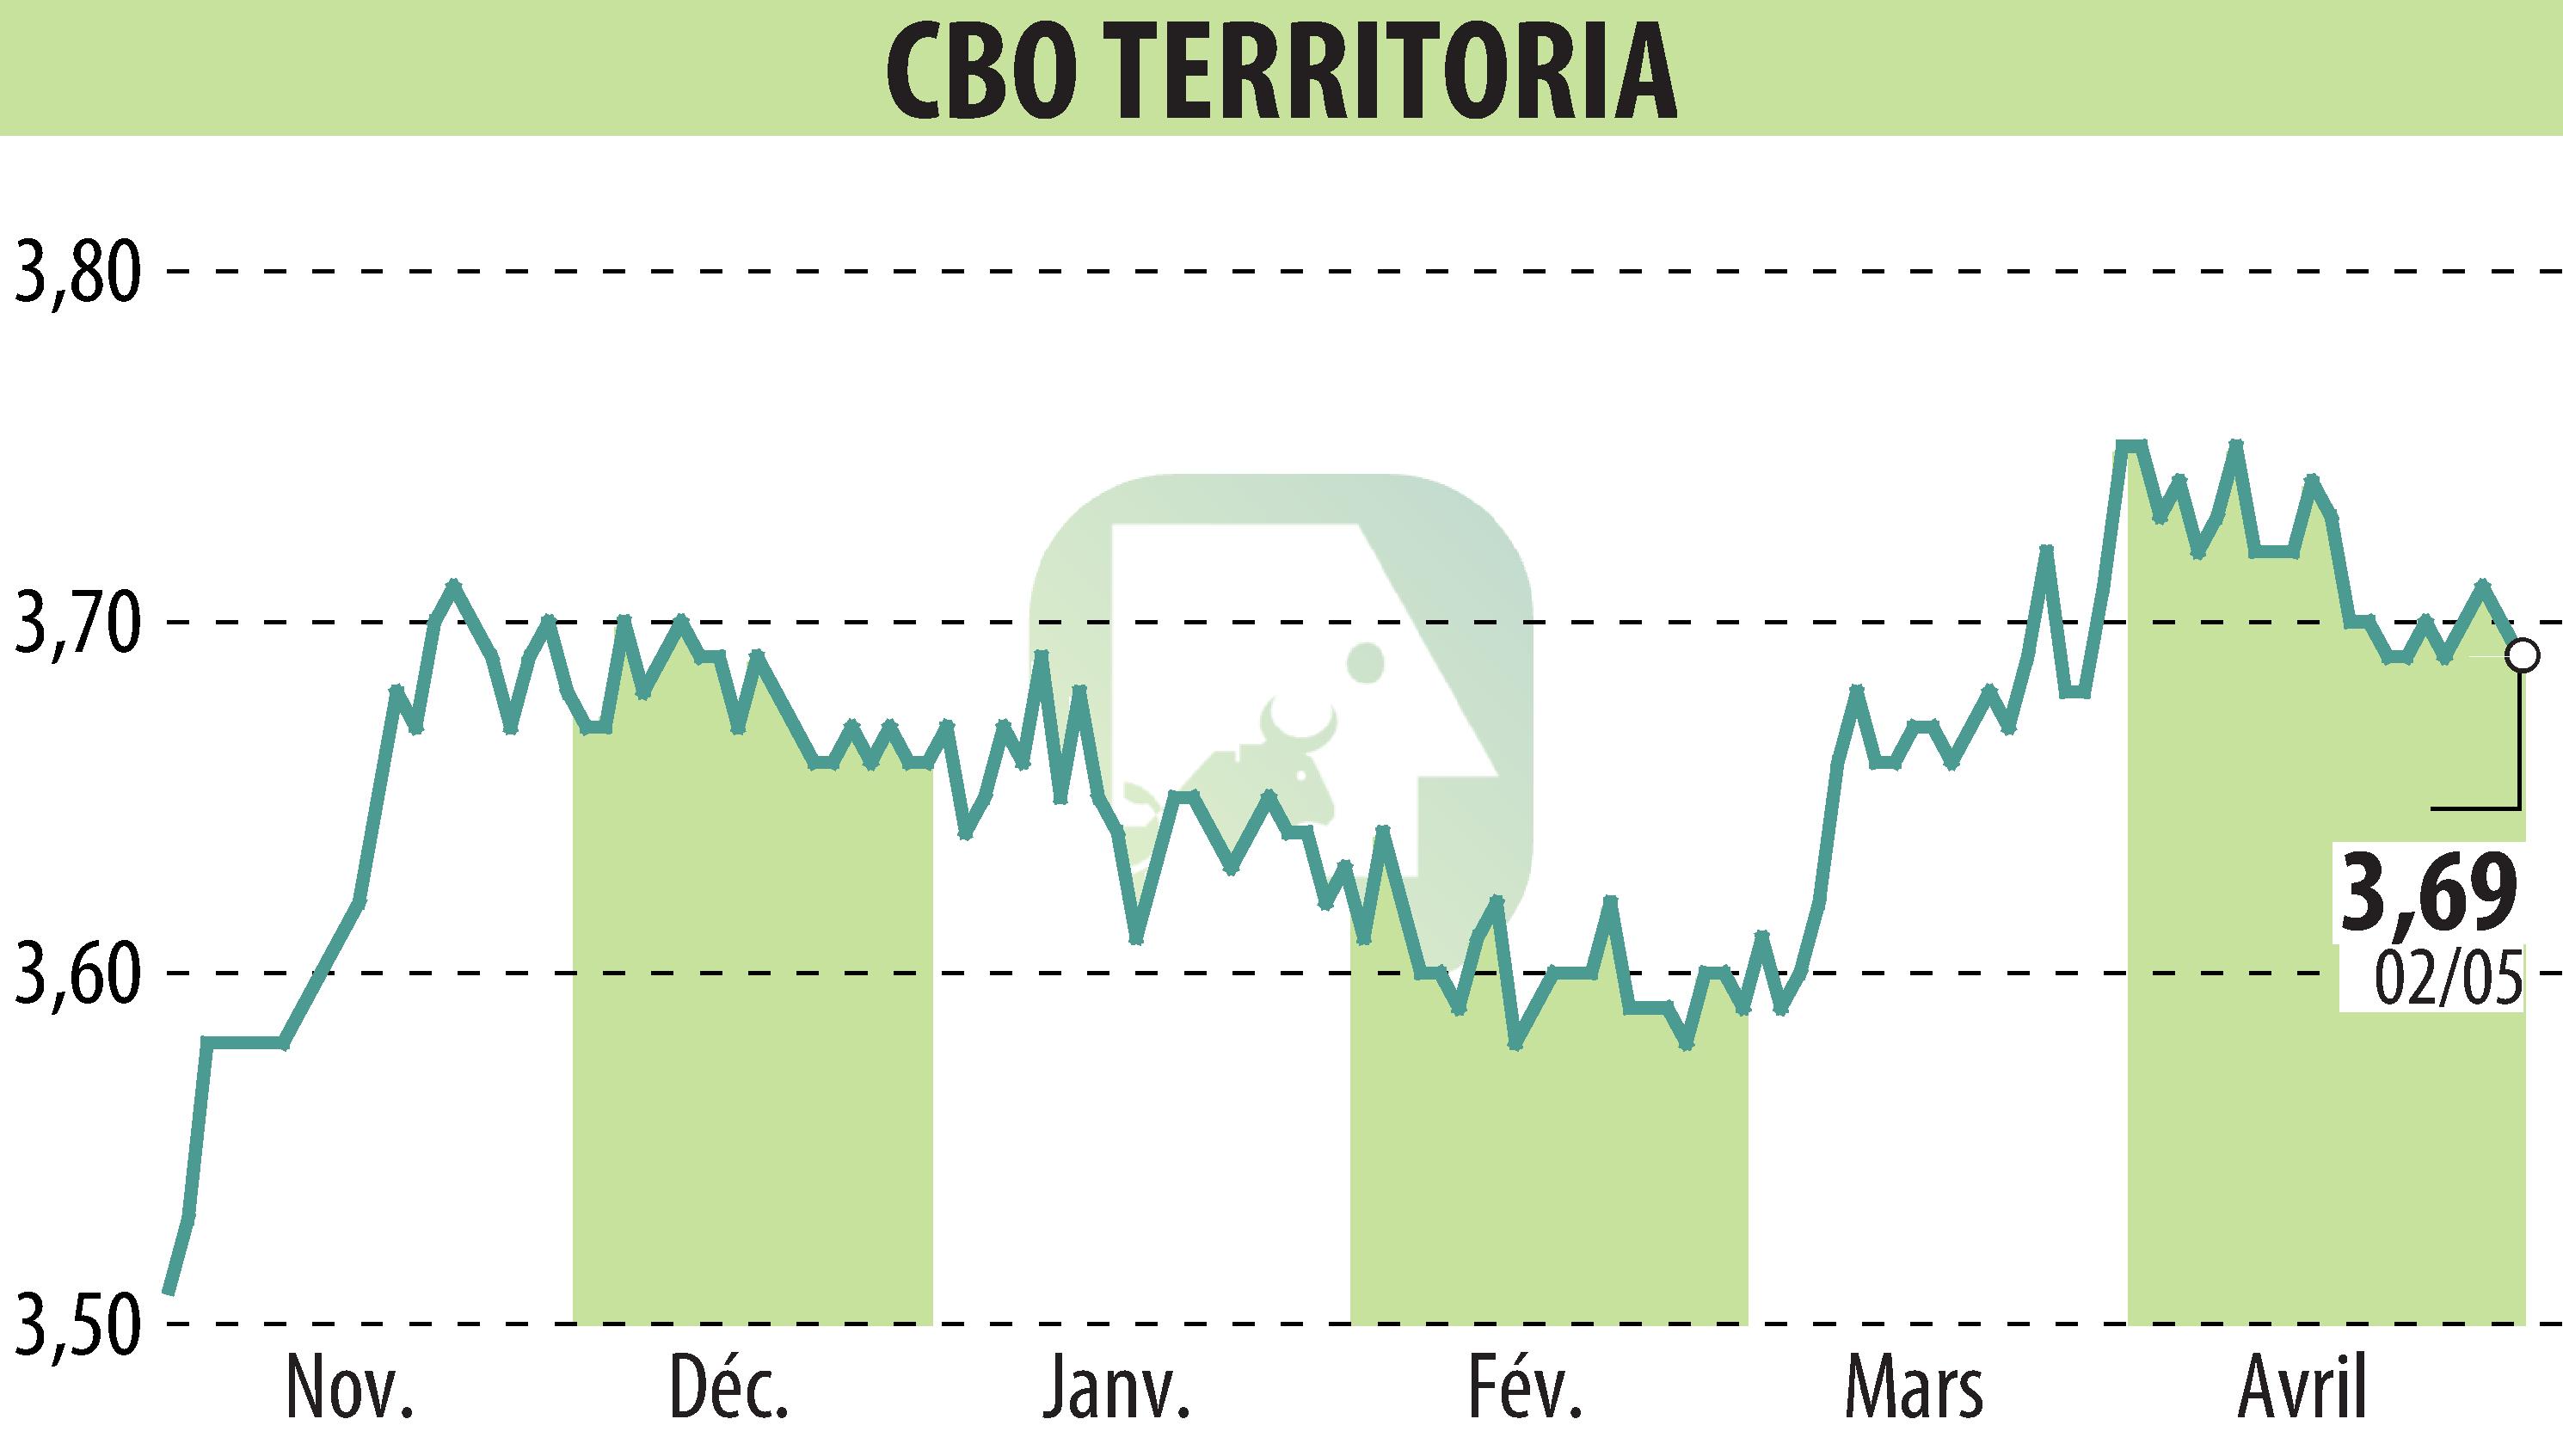 Stock price chart of CBO TERRITORIA  (EPA:CBOT) showing fluctuations.